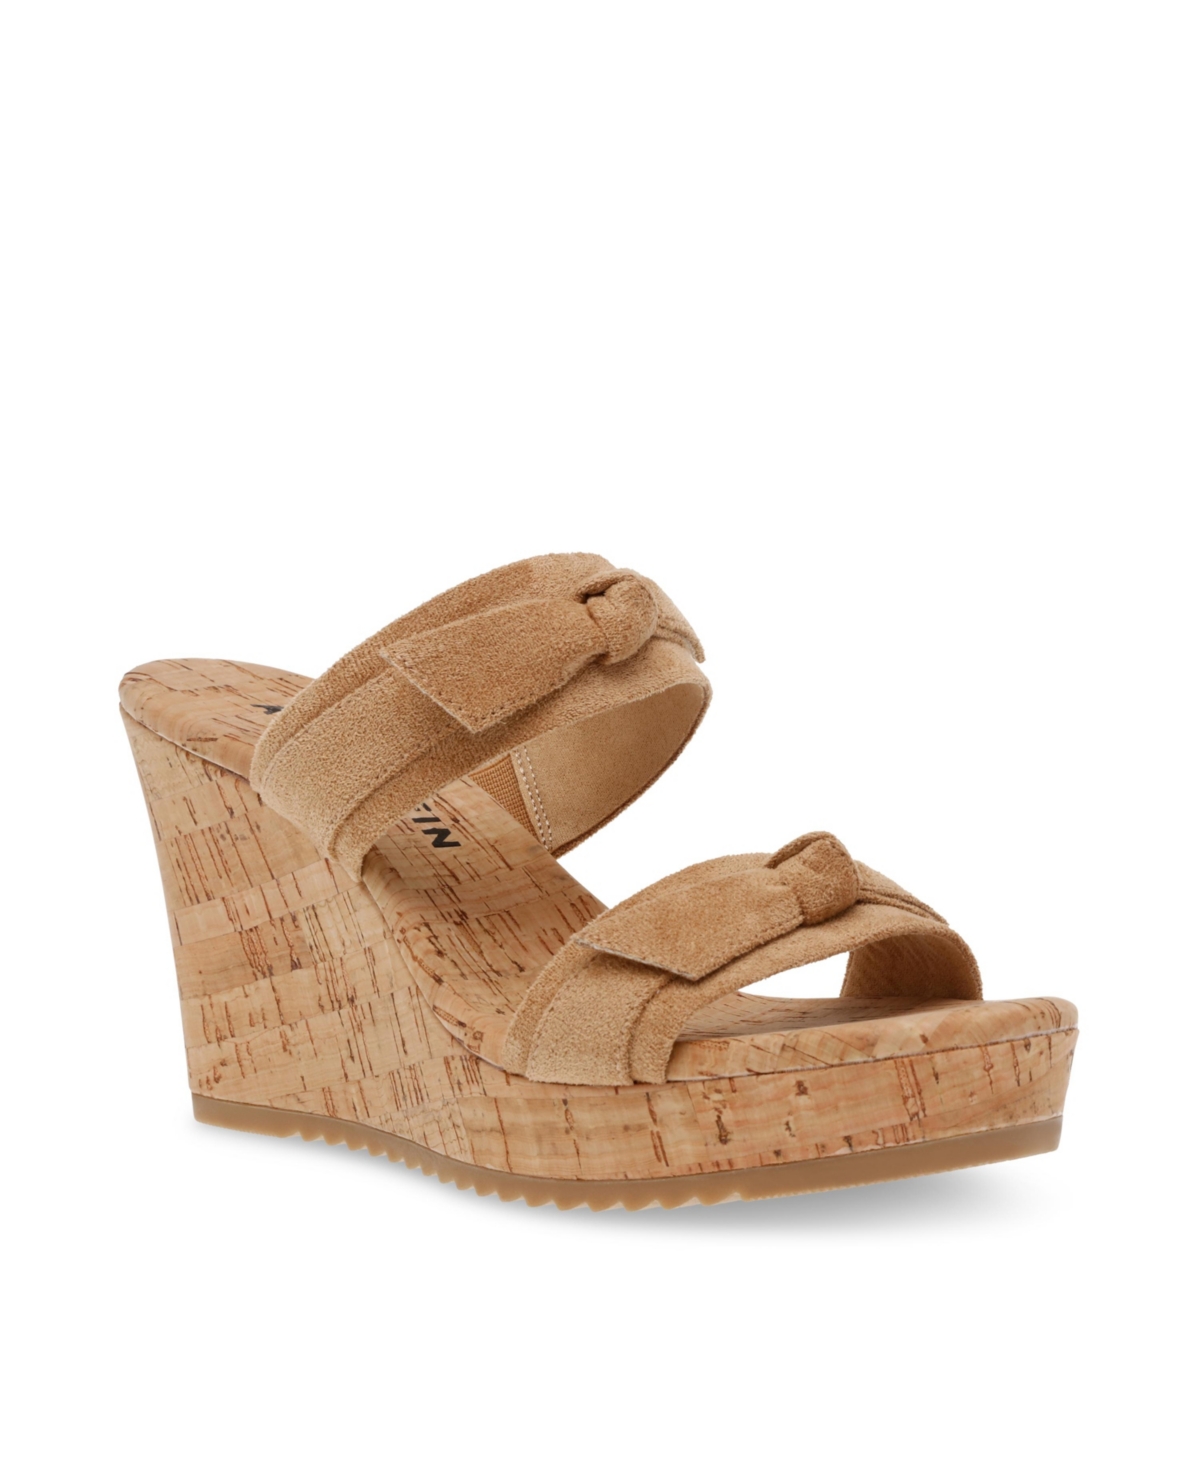 Anne Klein Wiona Wedge Sandal In Natural